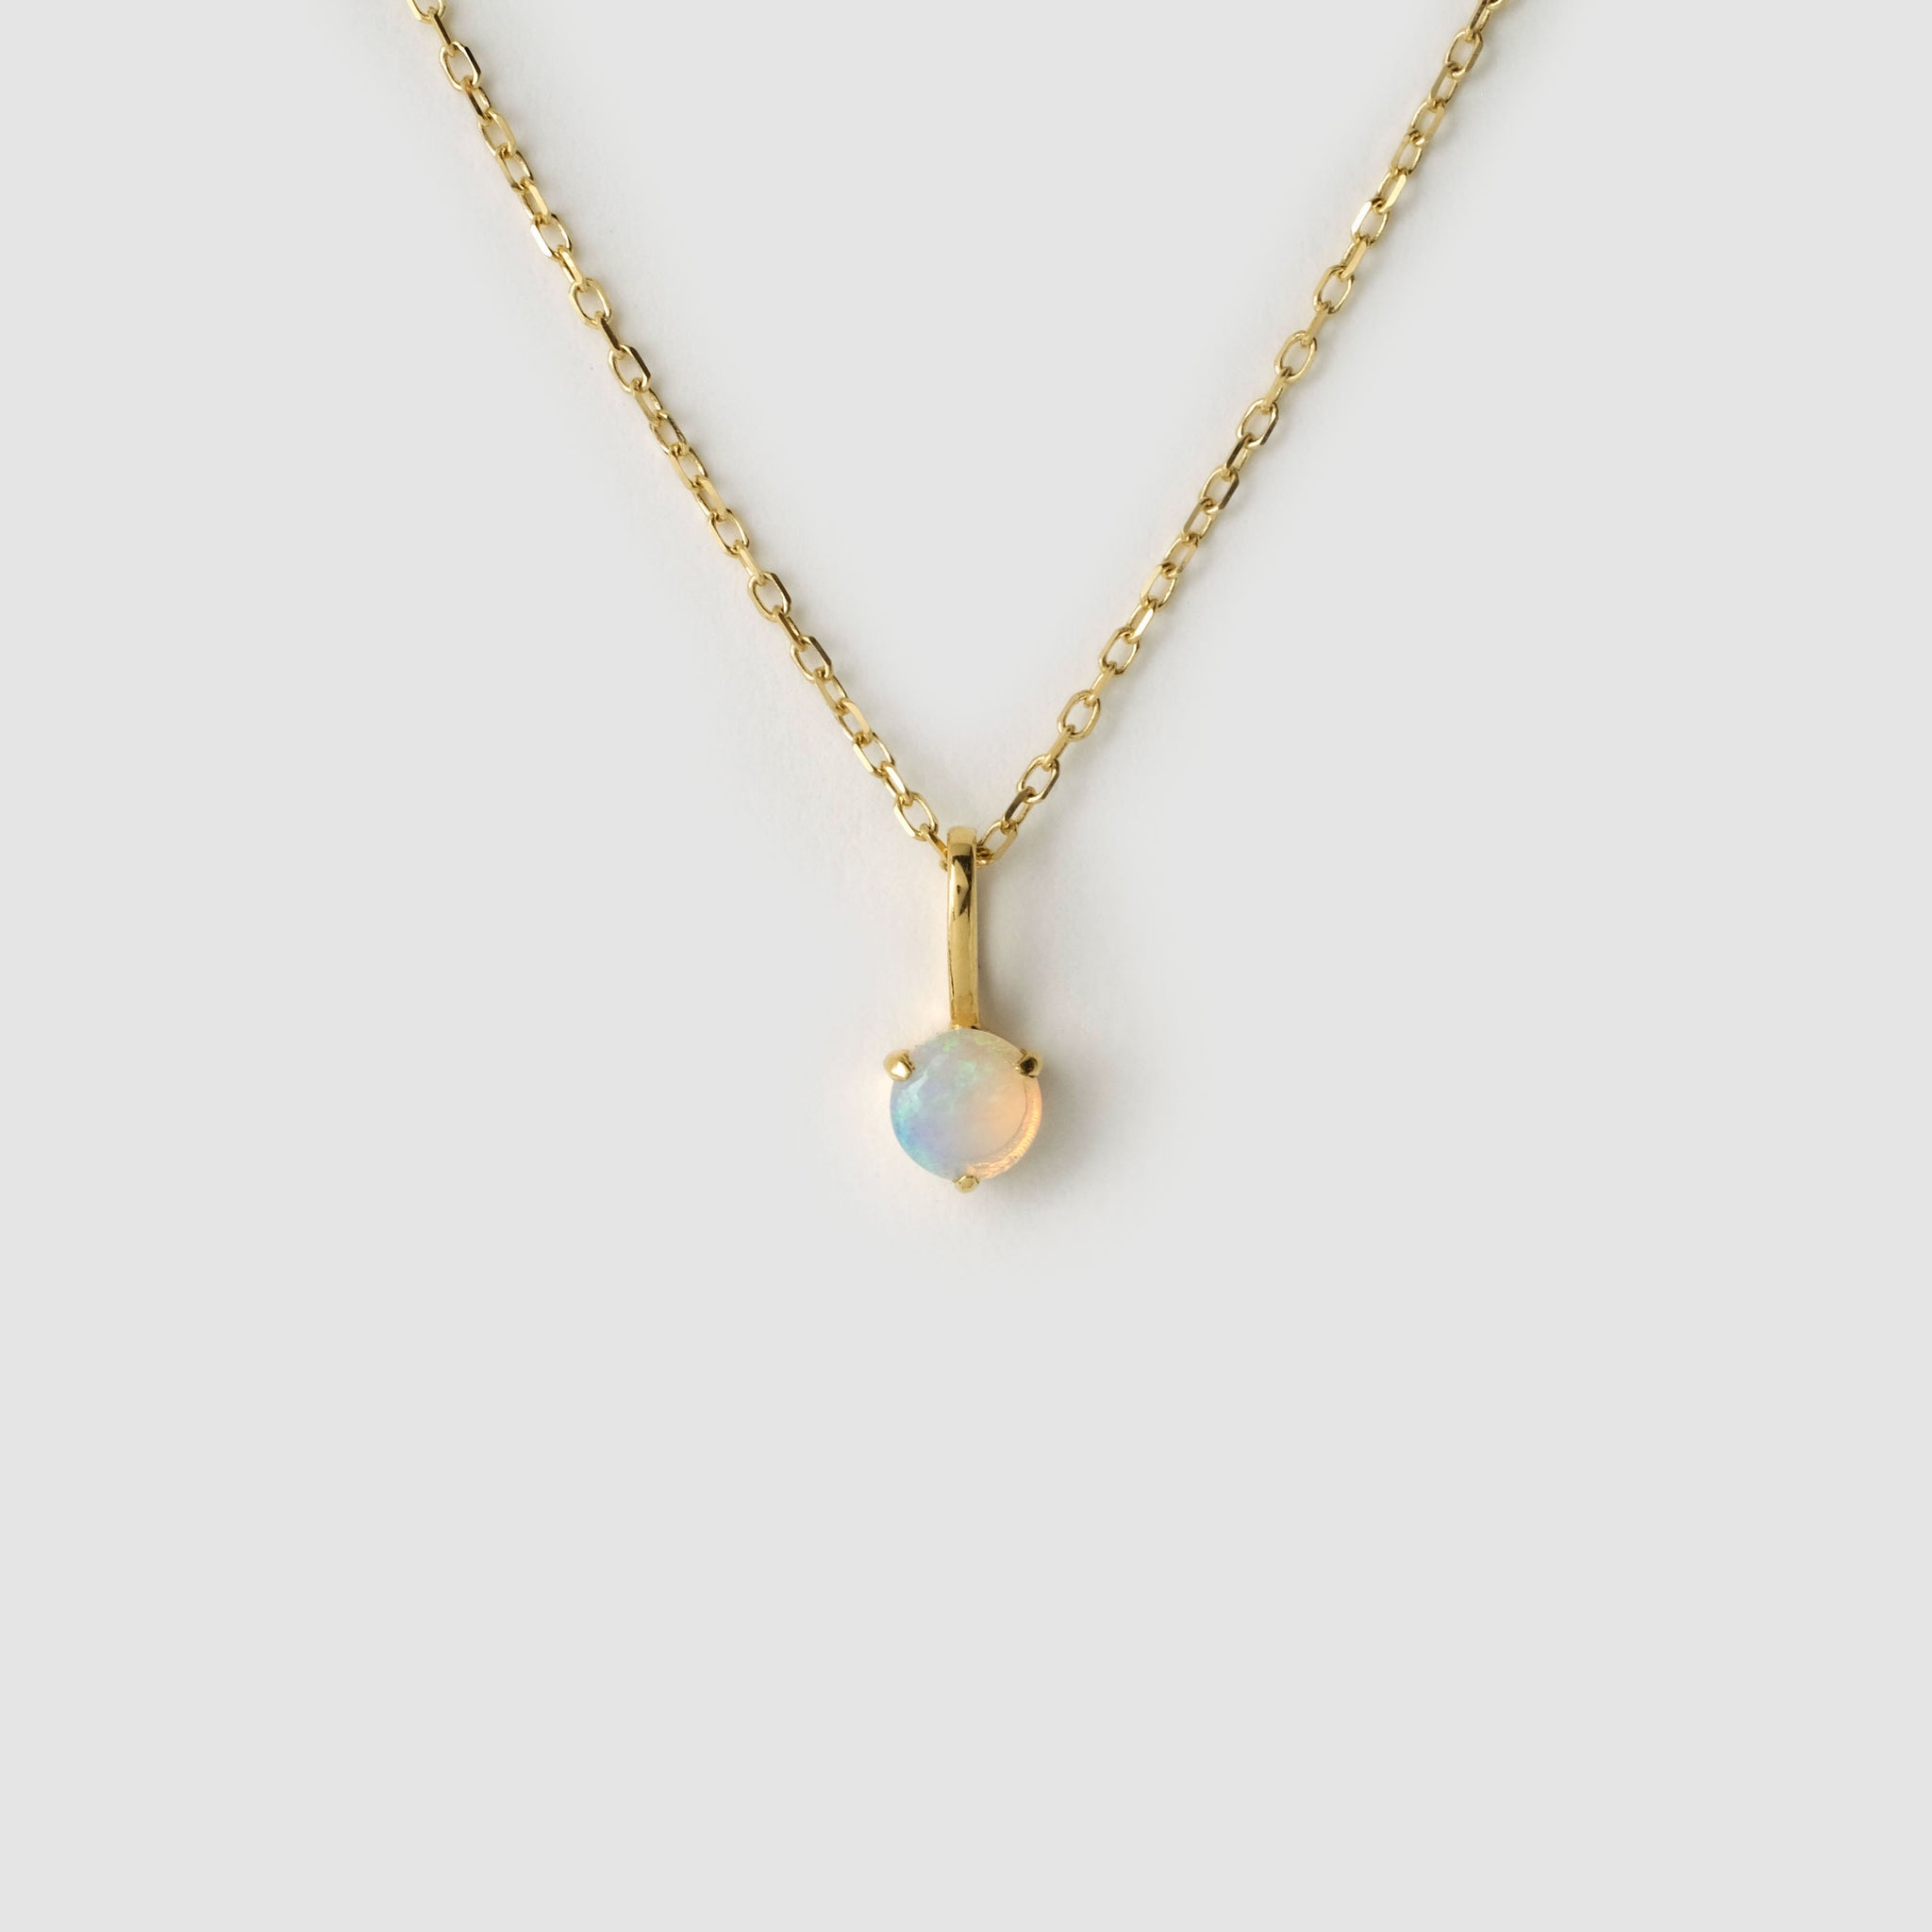 Round Opal Necklace / Pendant, 18k solid gold